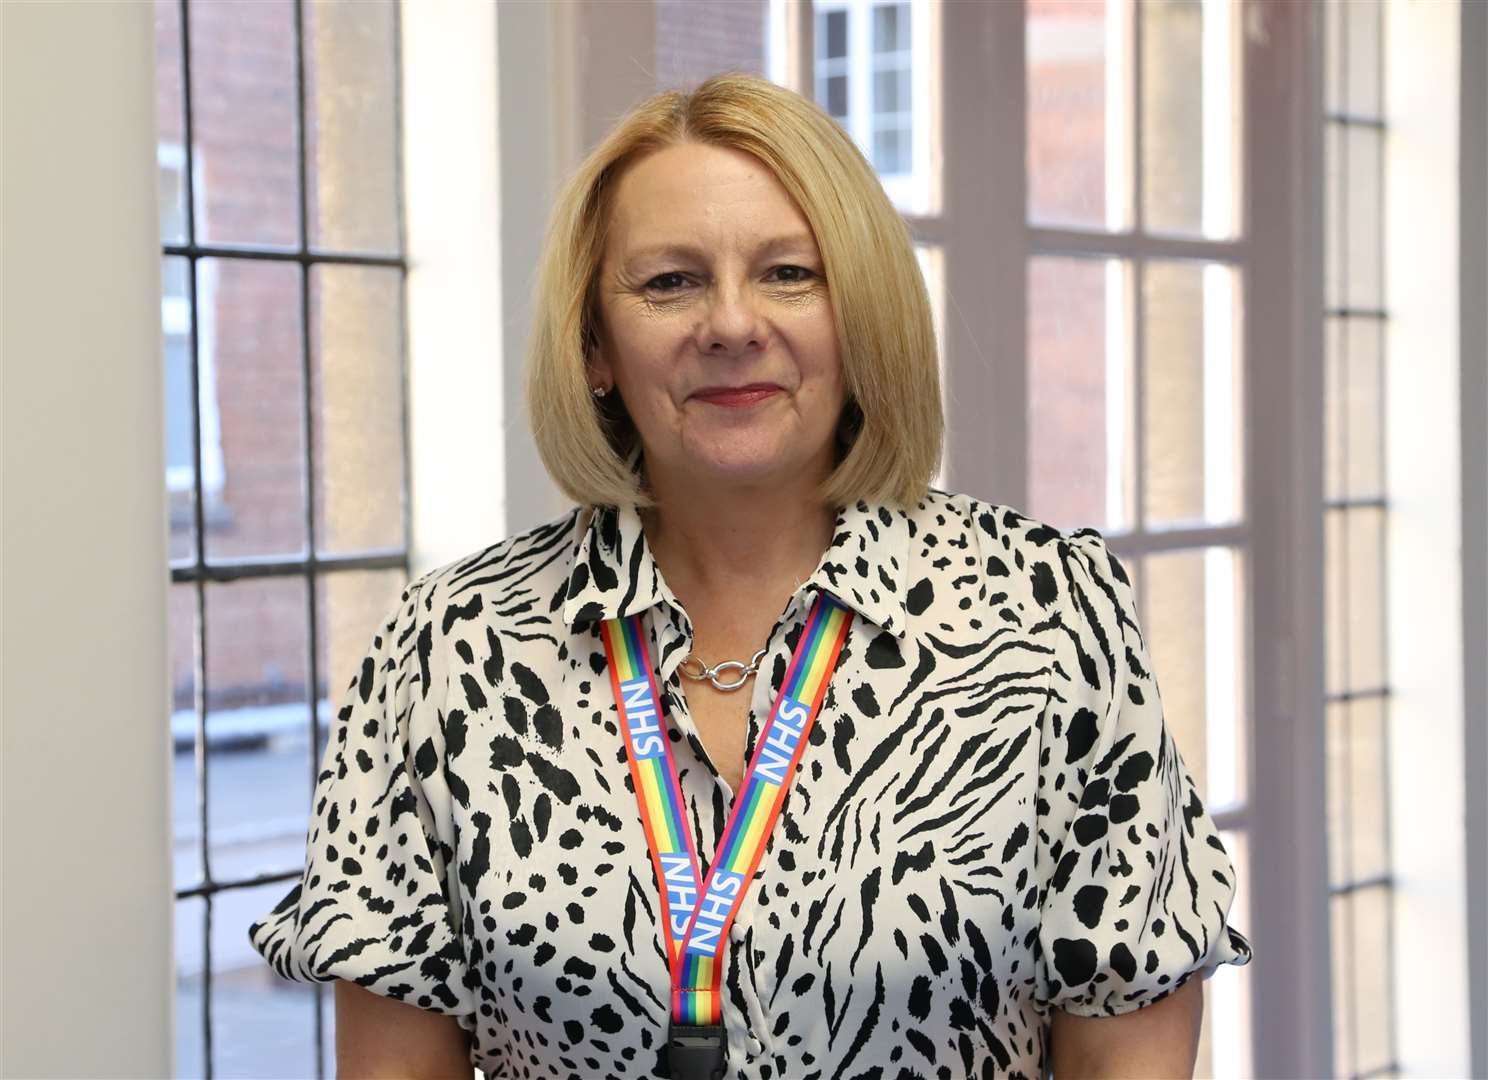 Jayne Black is chief executive of Medway NHS Foundation Trust